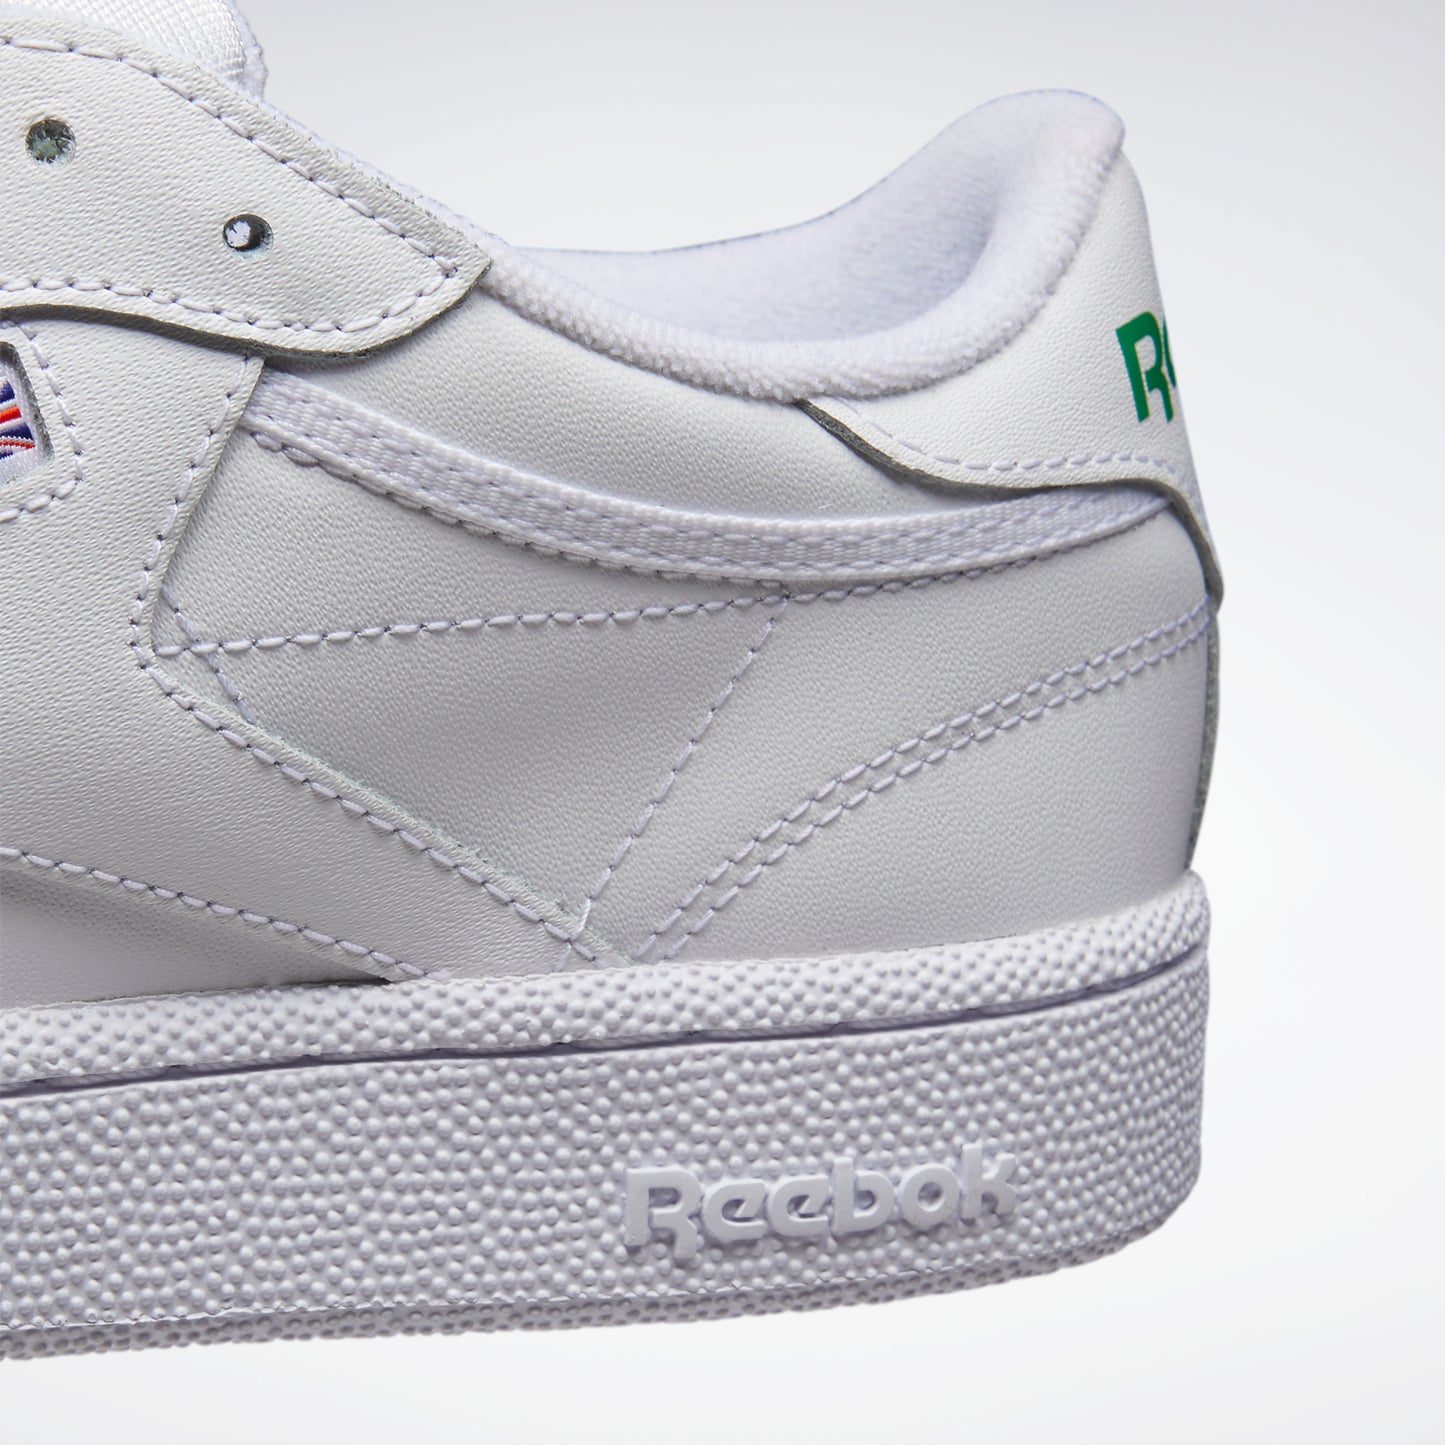 Club C 85 Shoes Int-White/Green